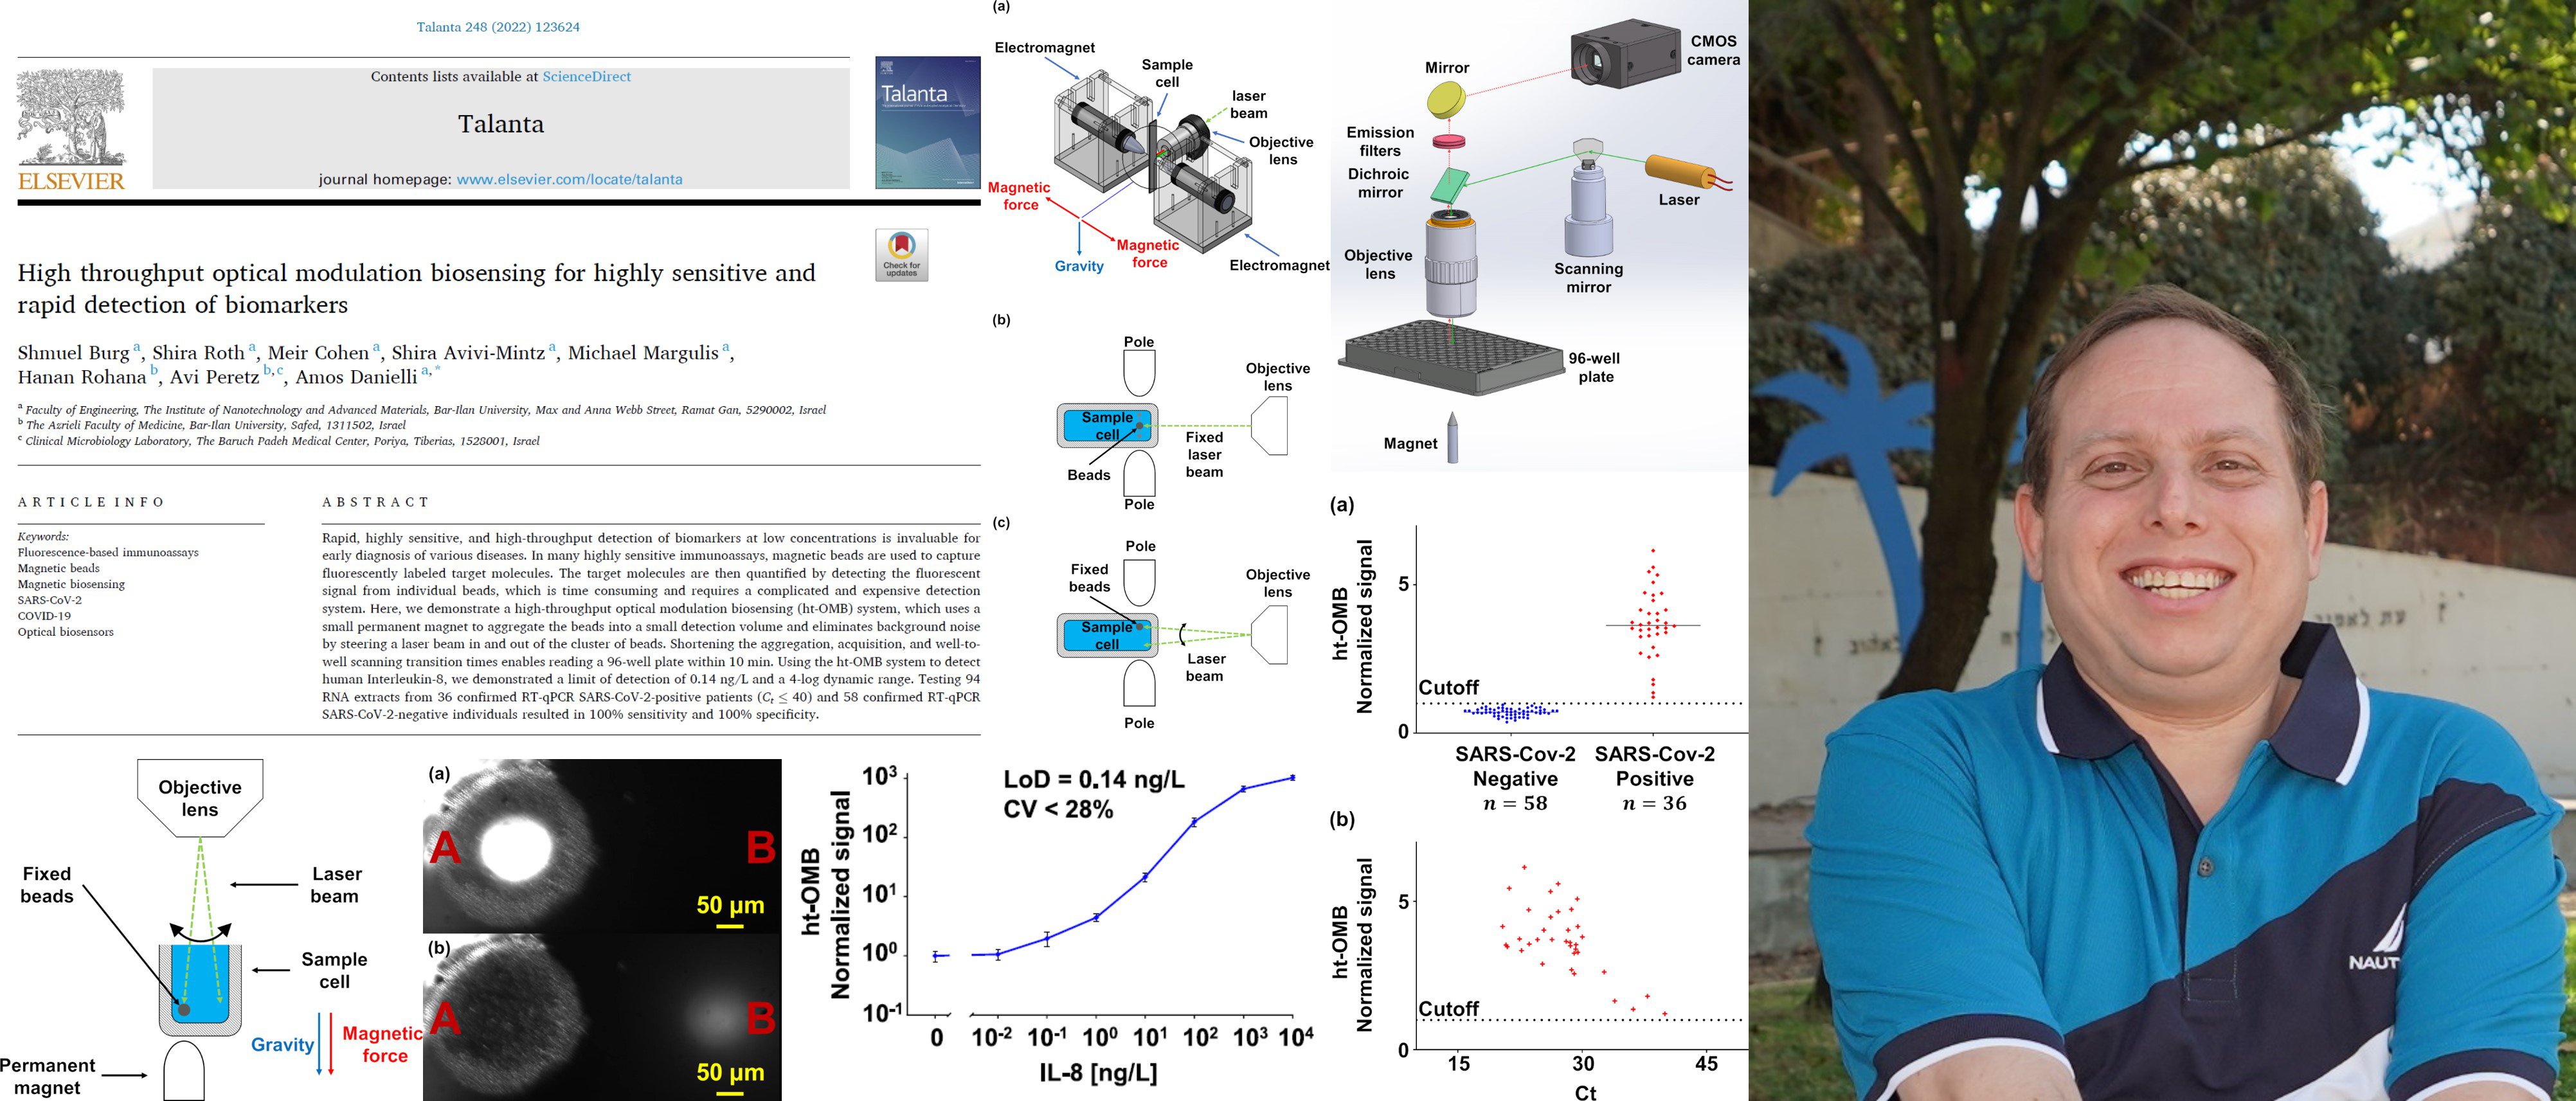 Congratulations to our Ph.D student, Shmuel Burg, for the publication of his paper at "Talanta". This is his 3rd paper which has been published in the framework of his Ph.D studies, and the 2nd time as the first author.

The paper, entitled 'High throughput optical modulation biosensing for highly sensitive and rapid detection of biomarkers', can be found in the Publications section, and at DOI: 10.1016/j.talanta.2022.123624